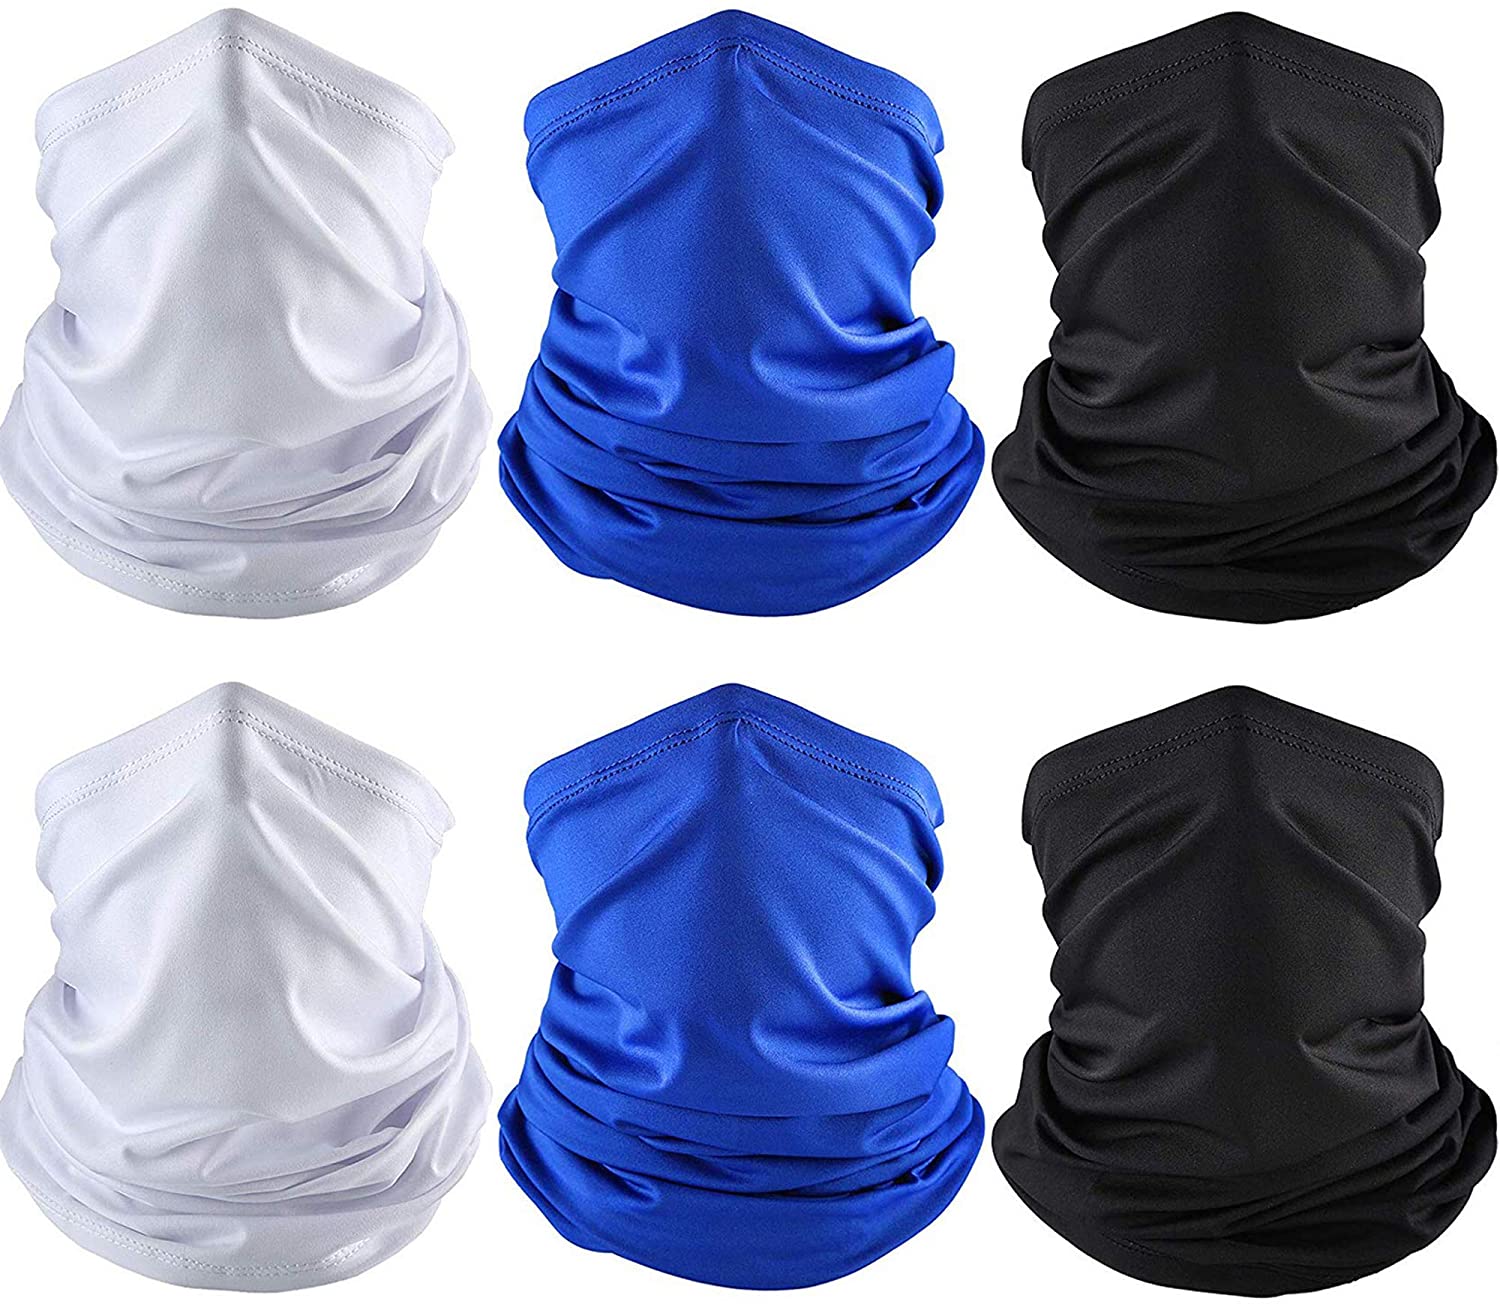 6 Pieces Summer Face Mask UV Protection Neck Gaiter Scarf Sunscreen Breathable 